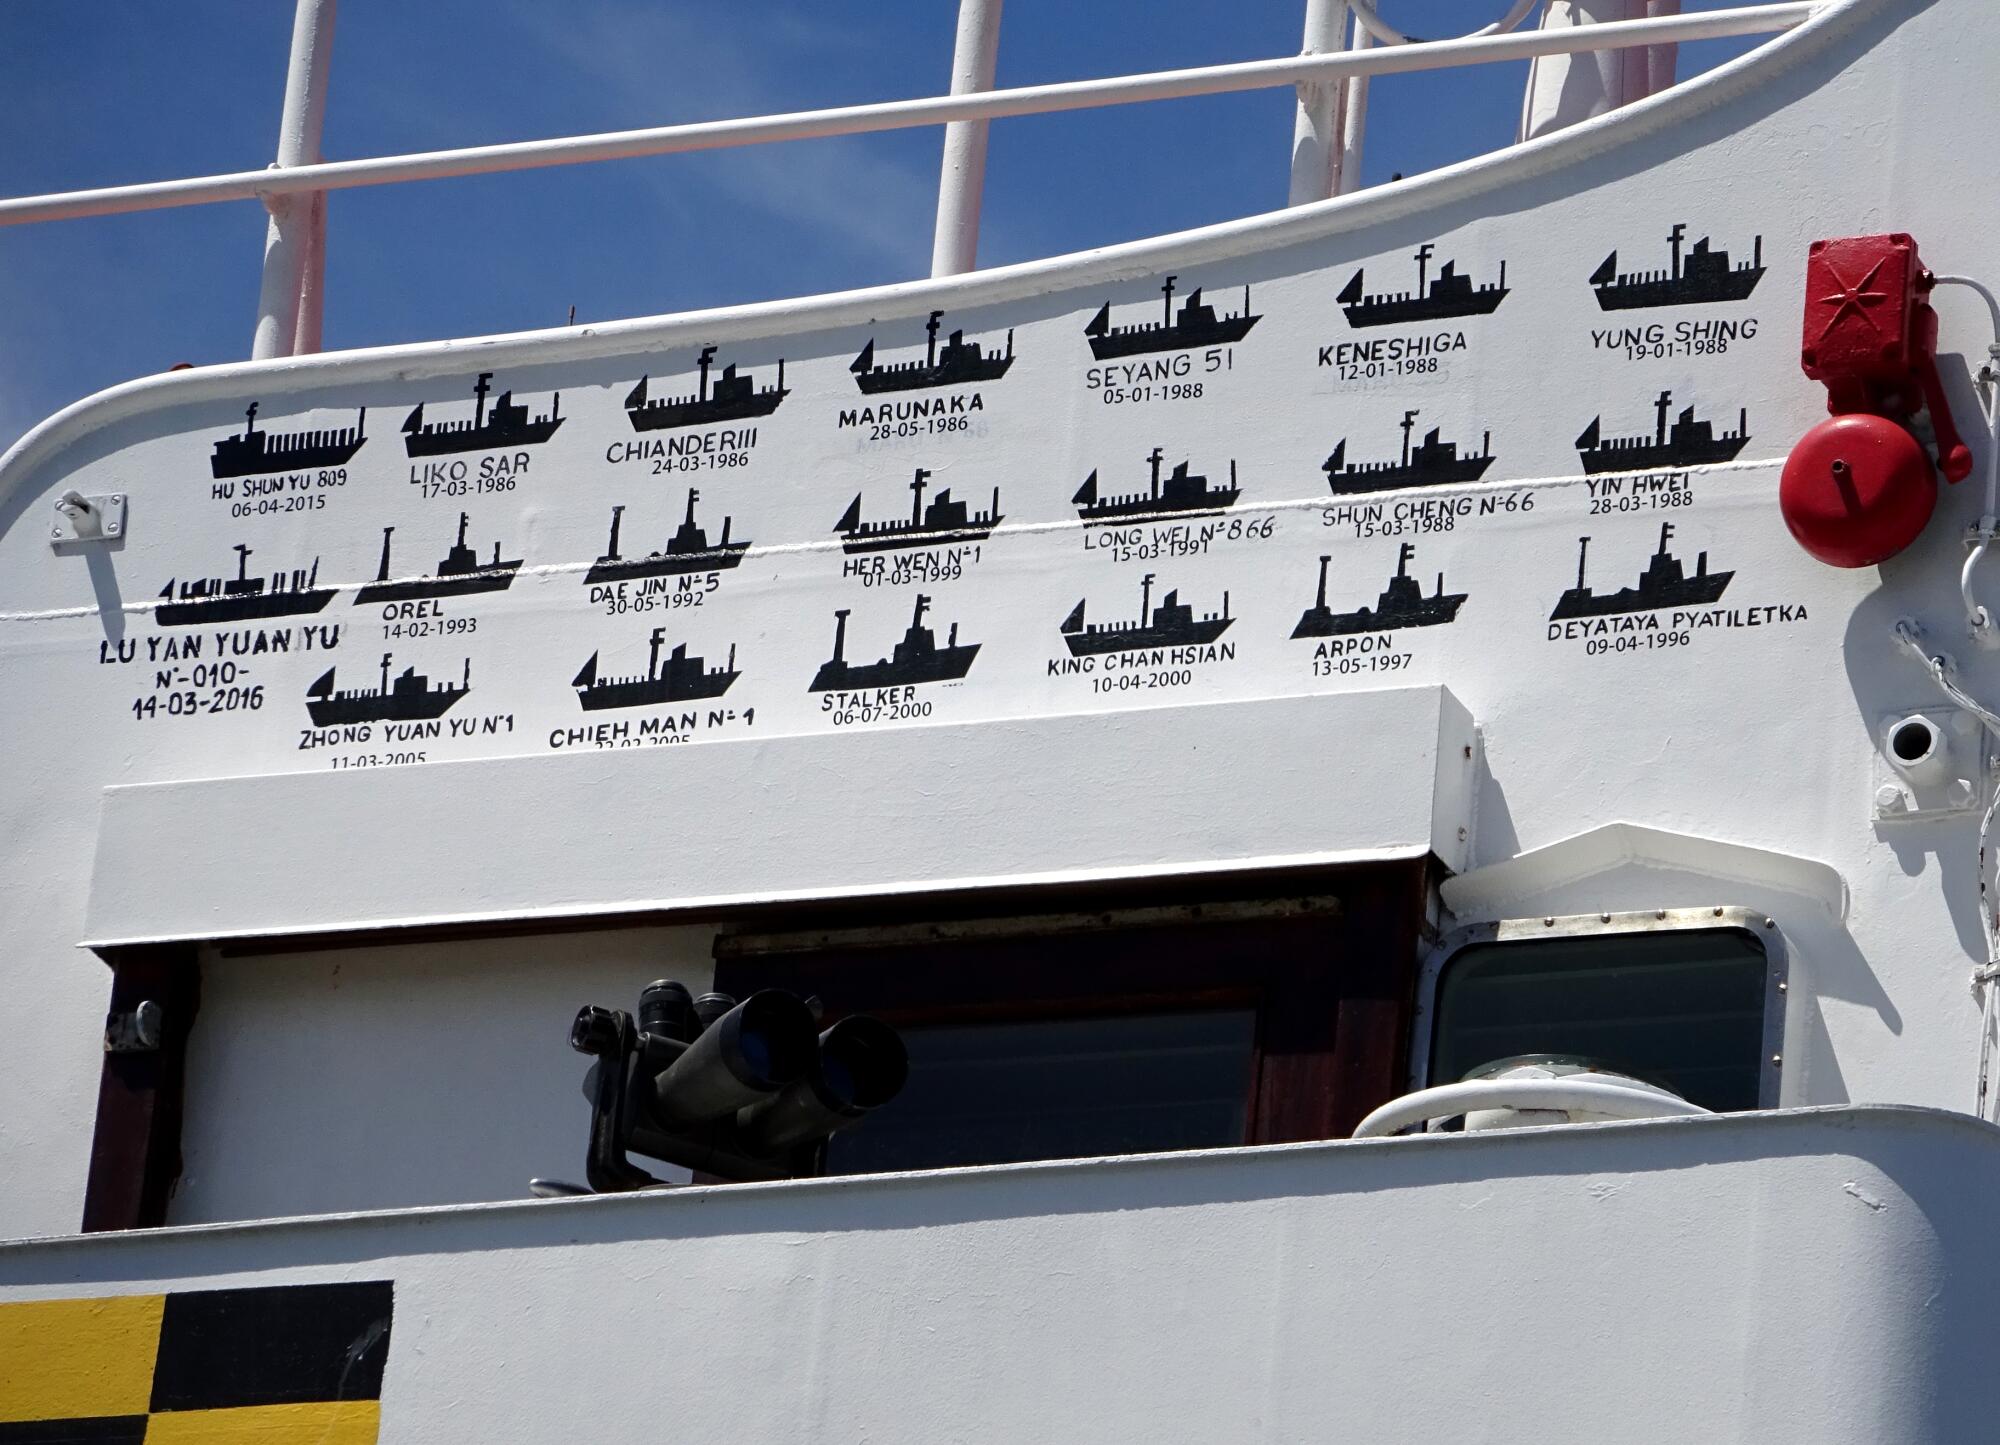 Three rows of black silhouettes of vessels adorn the white surface on the side of a ship